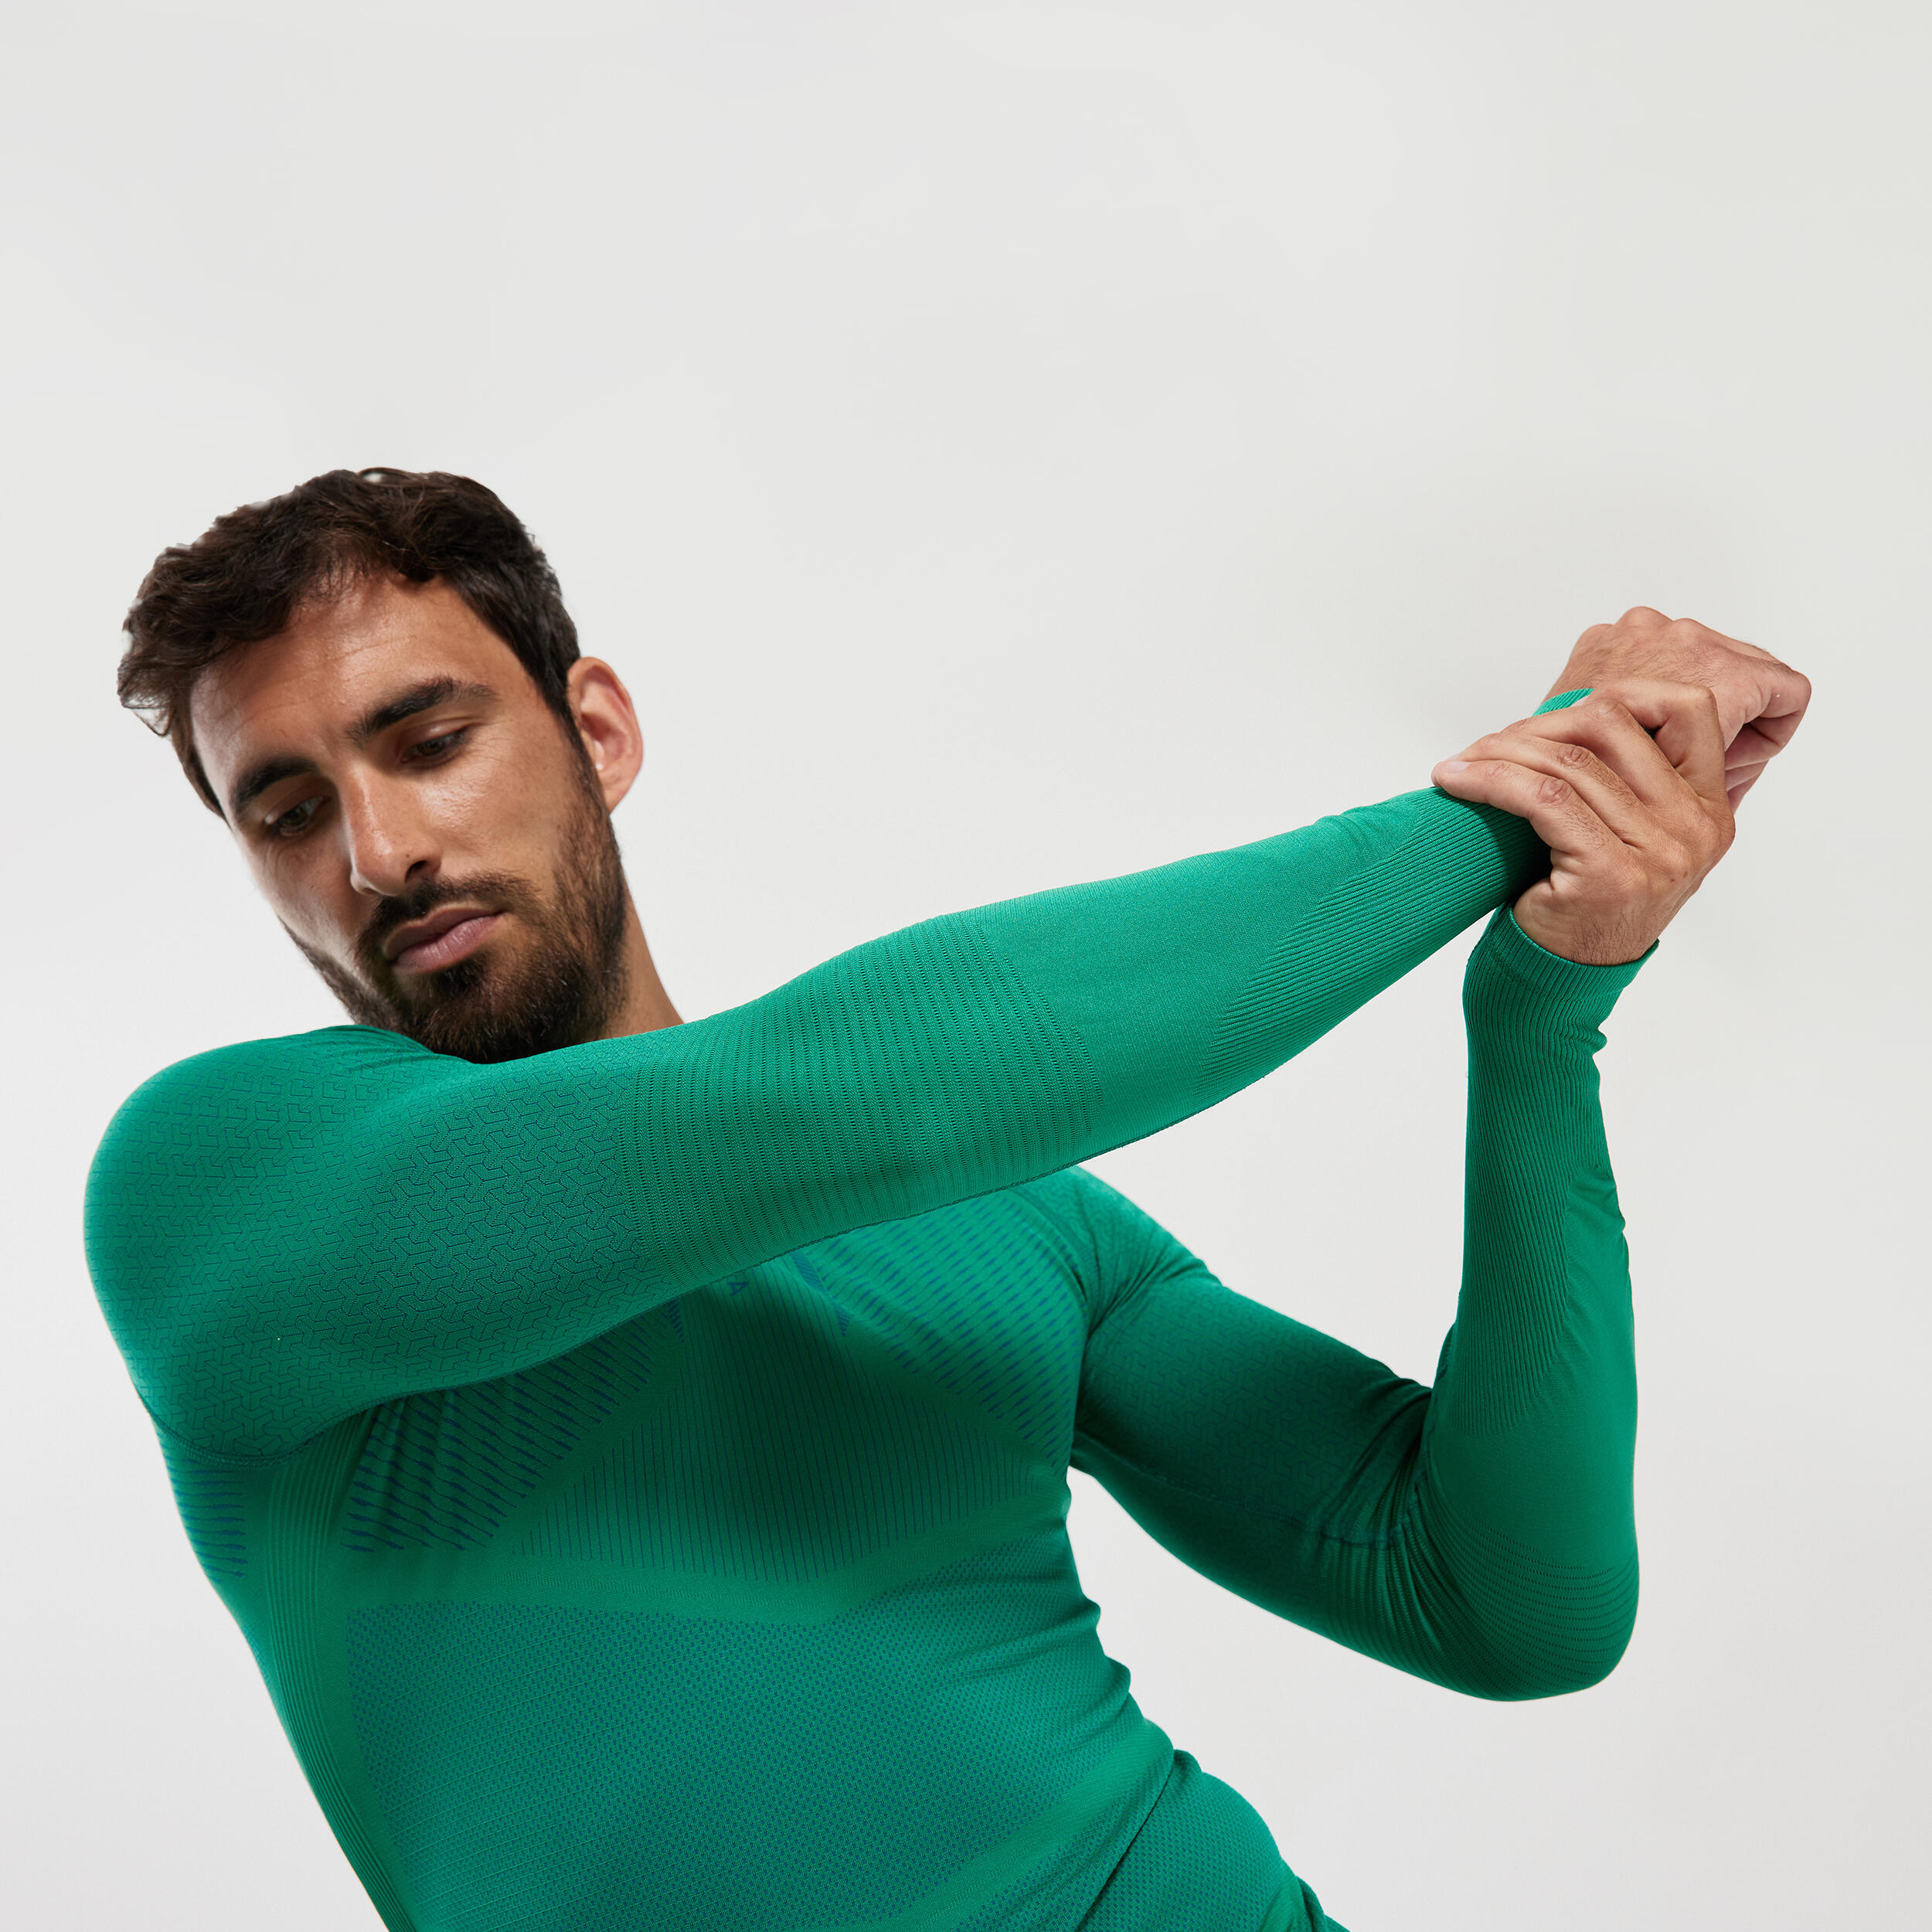 Adult Long-Sleeved Thermal Base Layer Top Keepdry 500 - Green 5/14